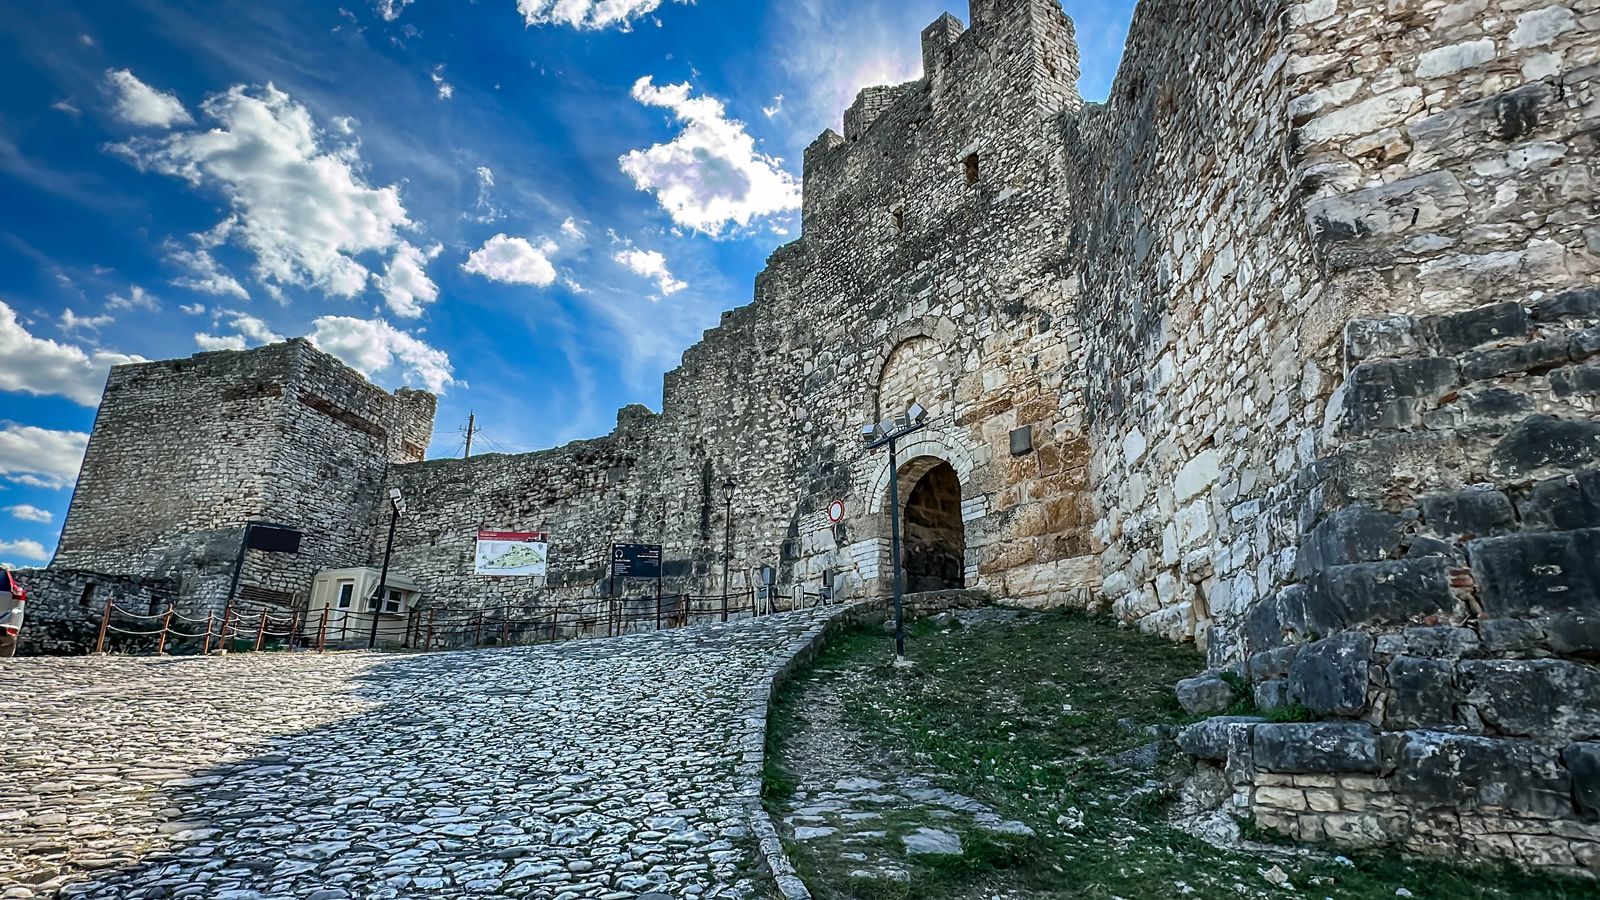 Kala Castle - Things to see in berat Albania in one day